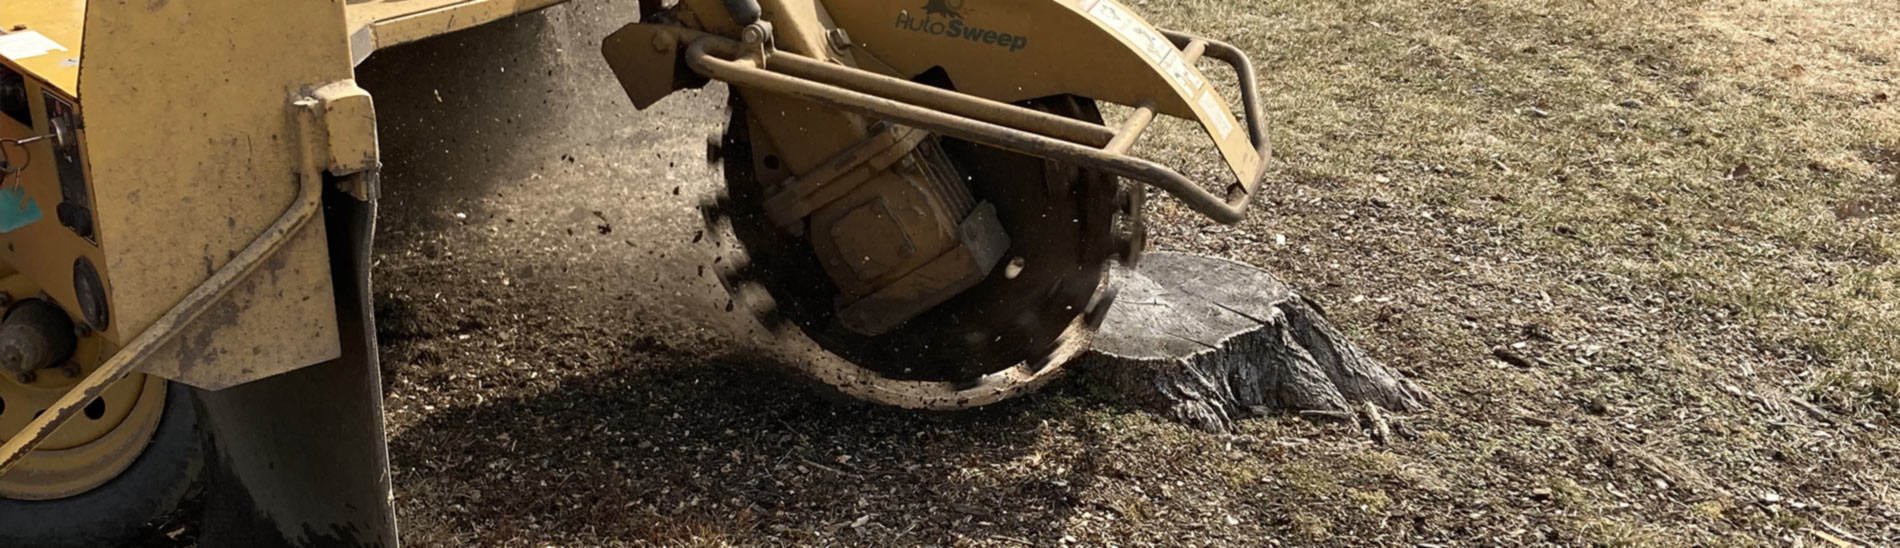 A grinder chips away at a tree stump in the public right-of-way.